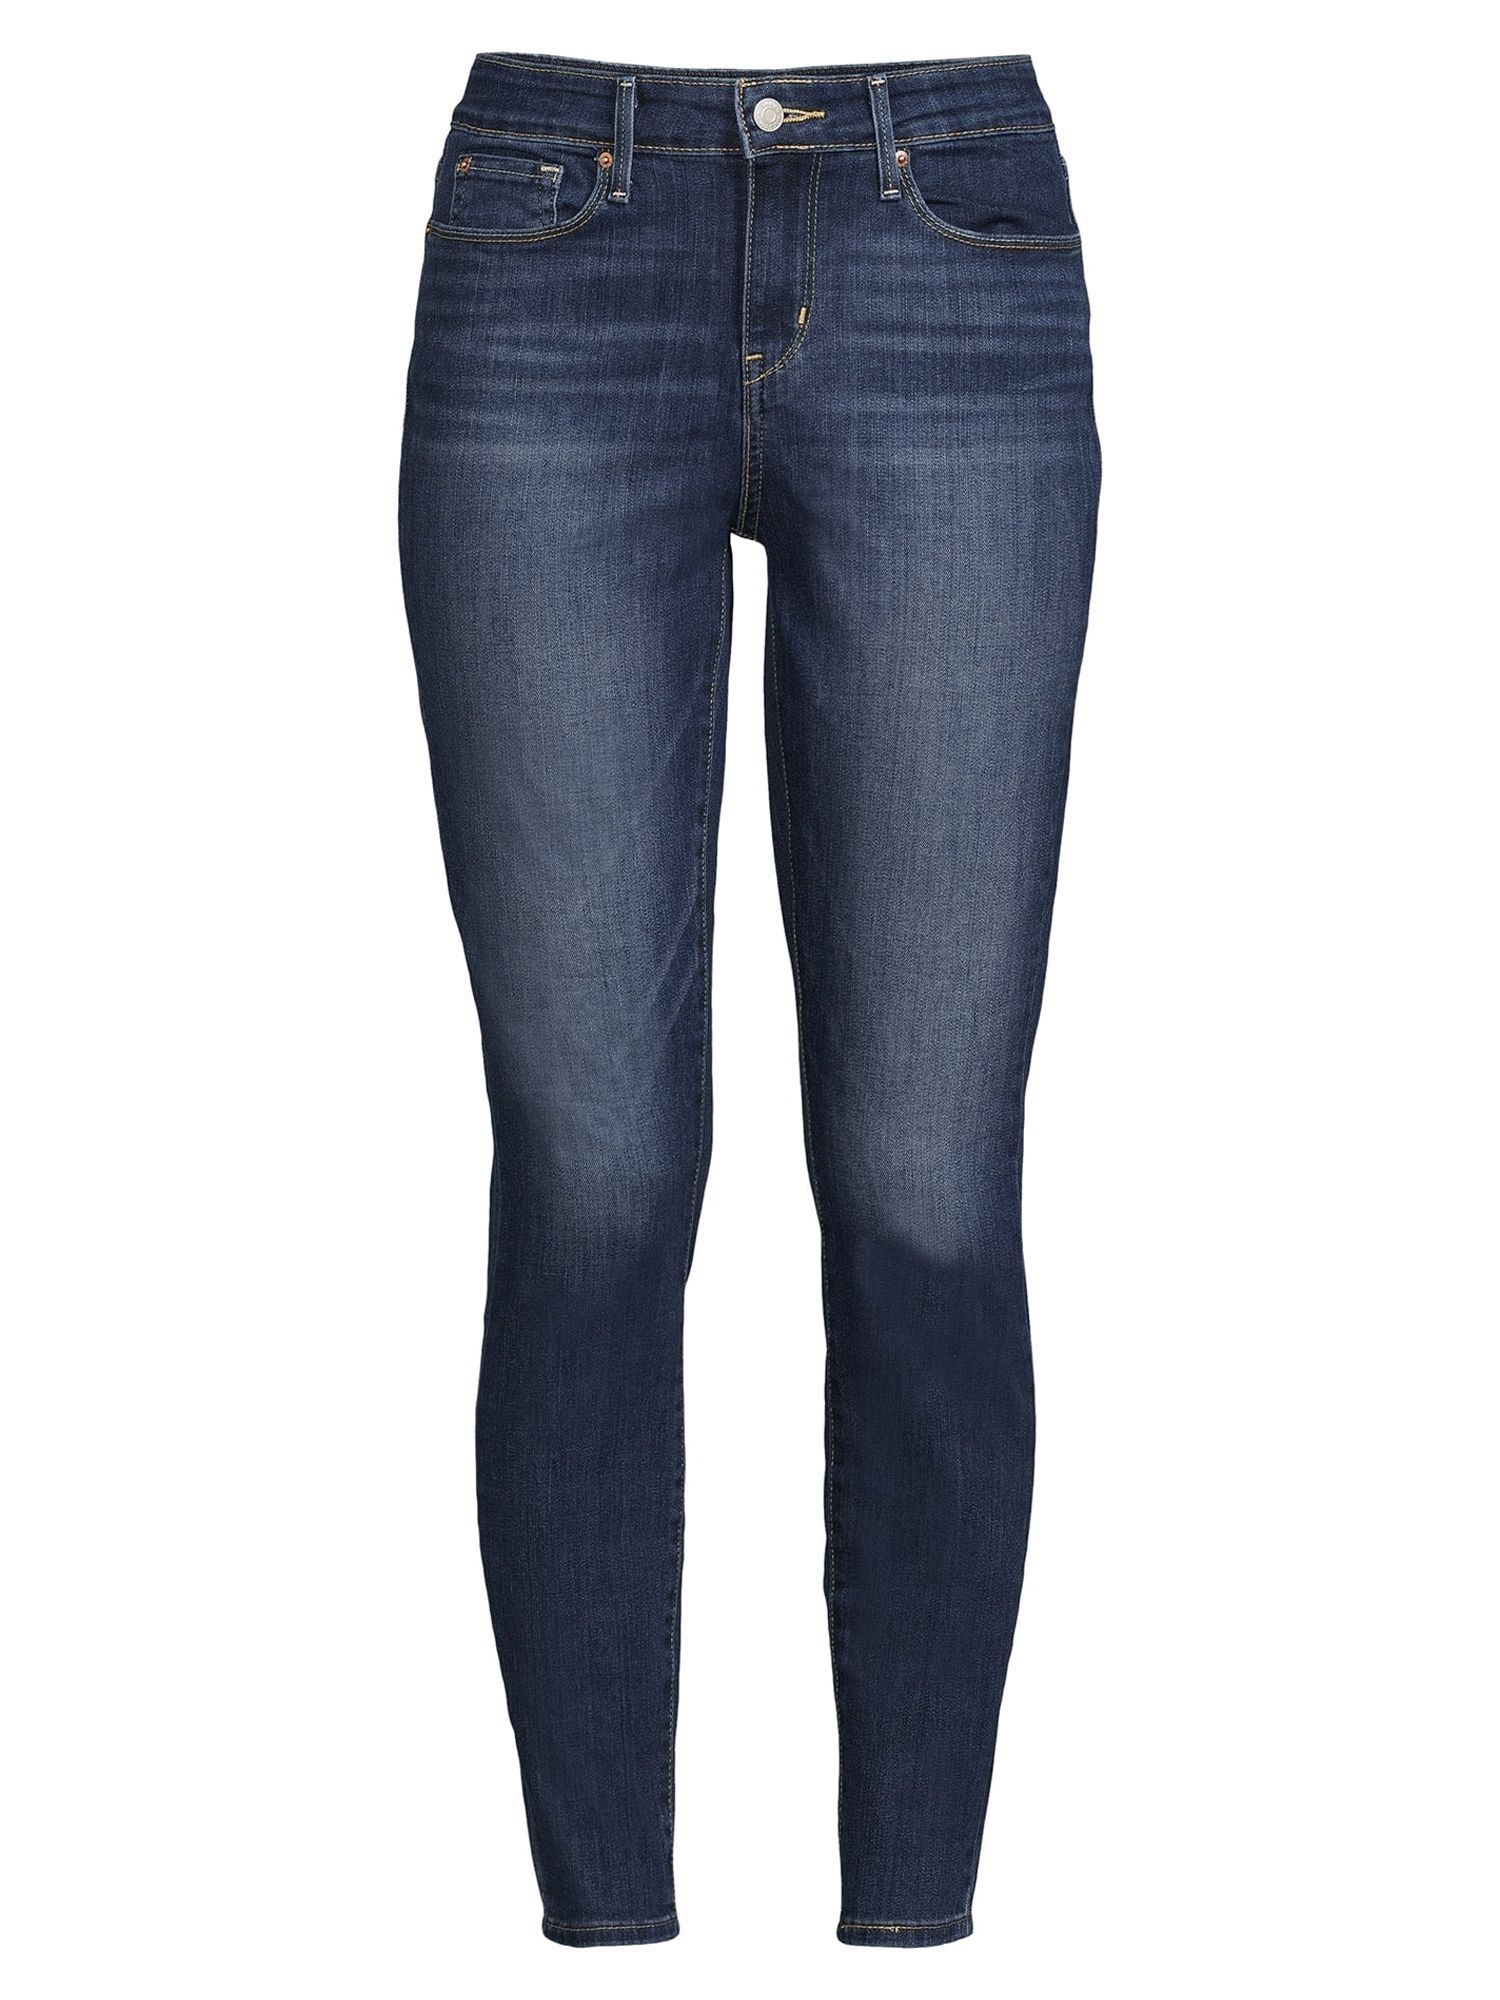 Signature by Levi Strauss & Co. Women's and Women's Plus Mid Rise Skinny Jeans - image 5 of 5